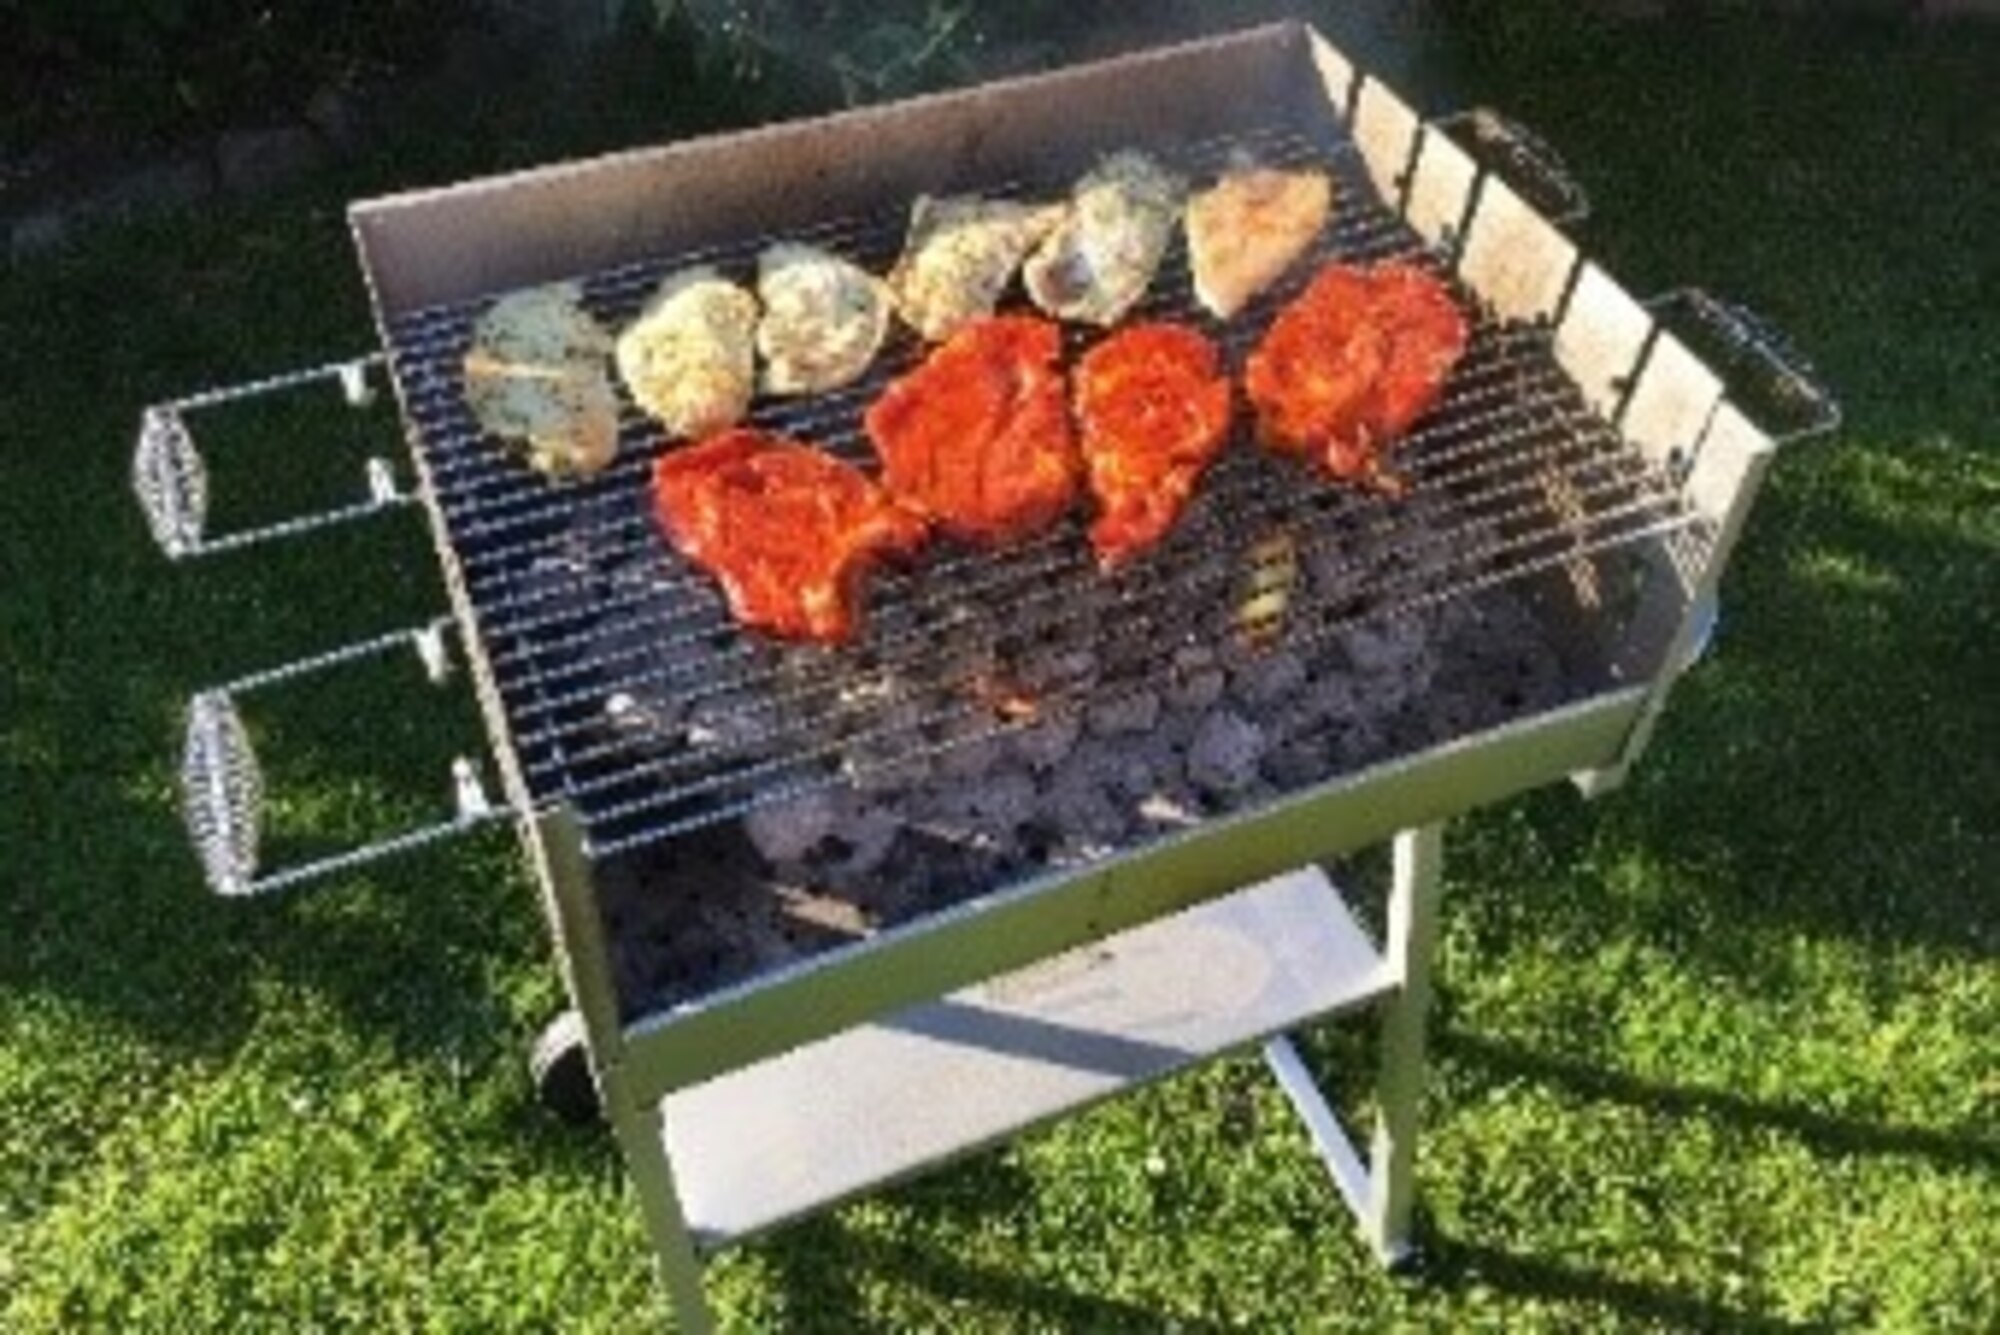 A photo of a grill with meat cooking.